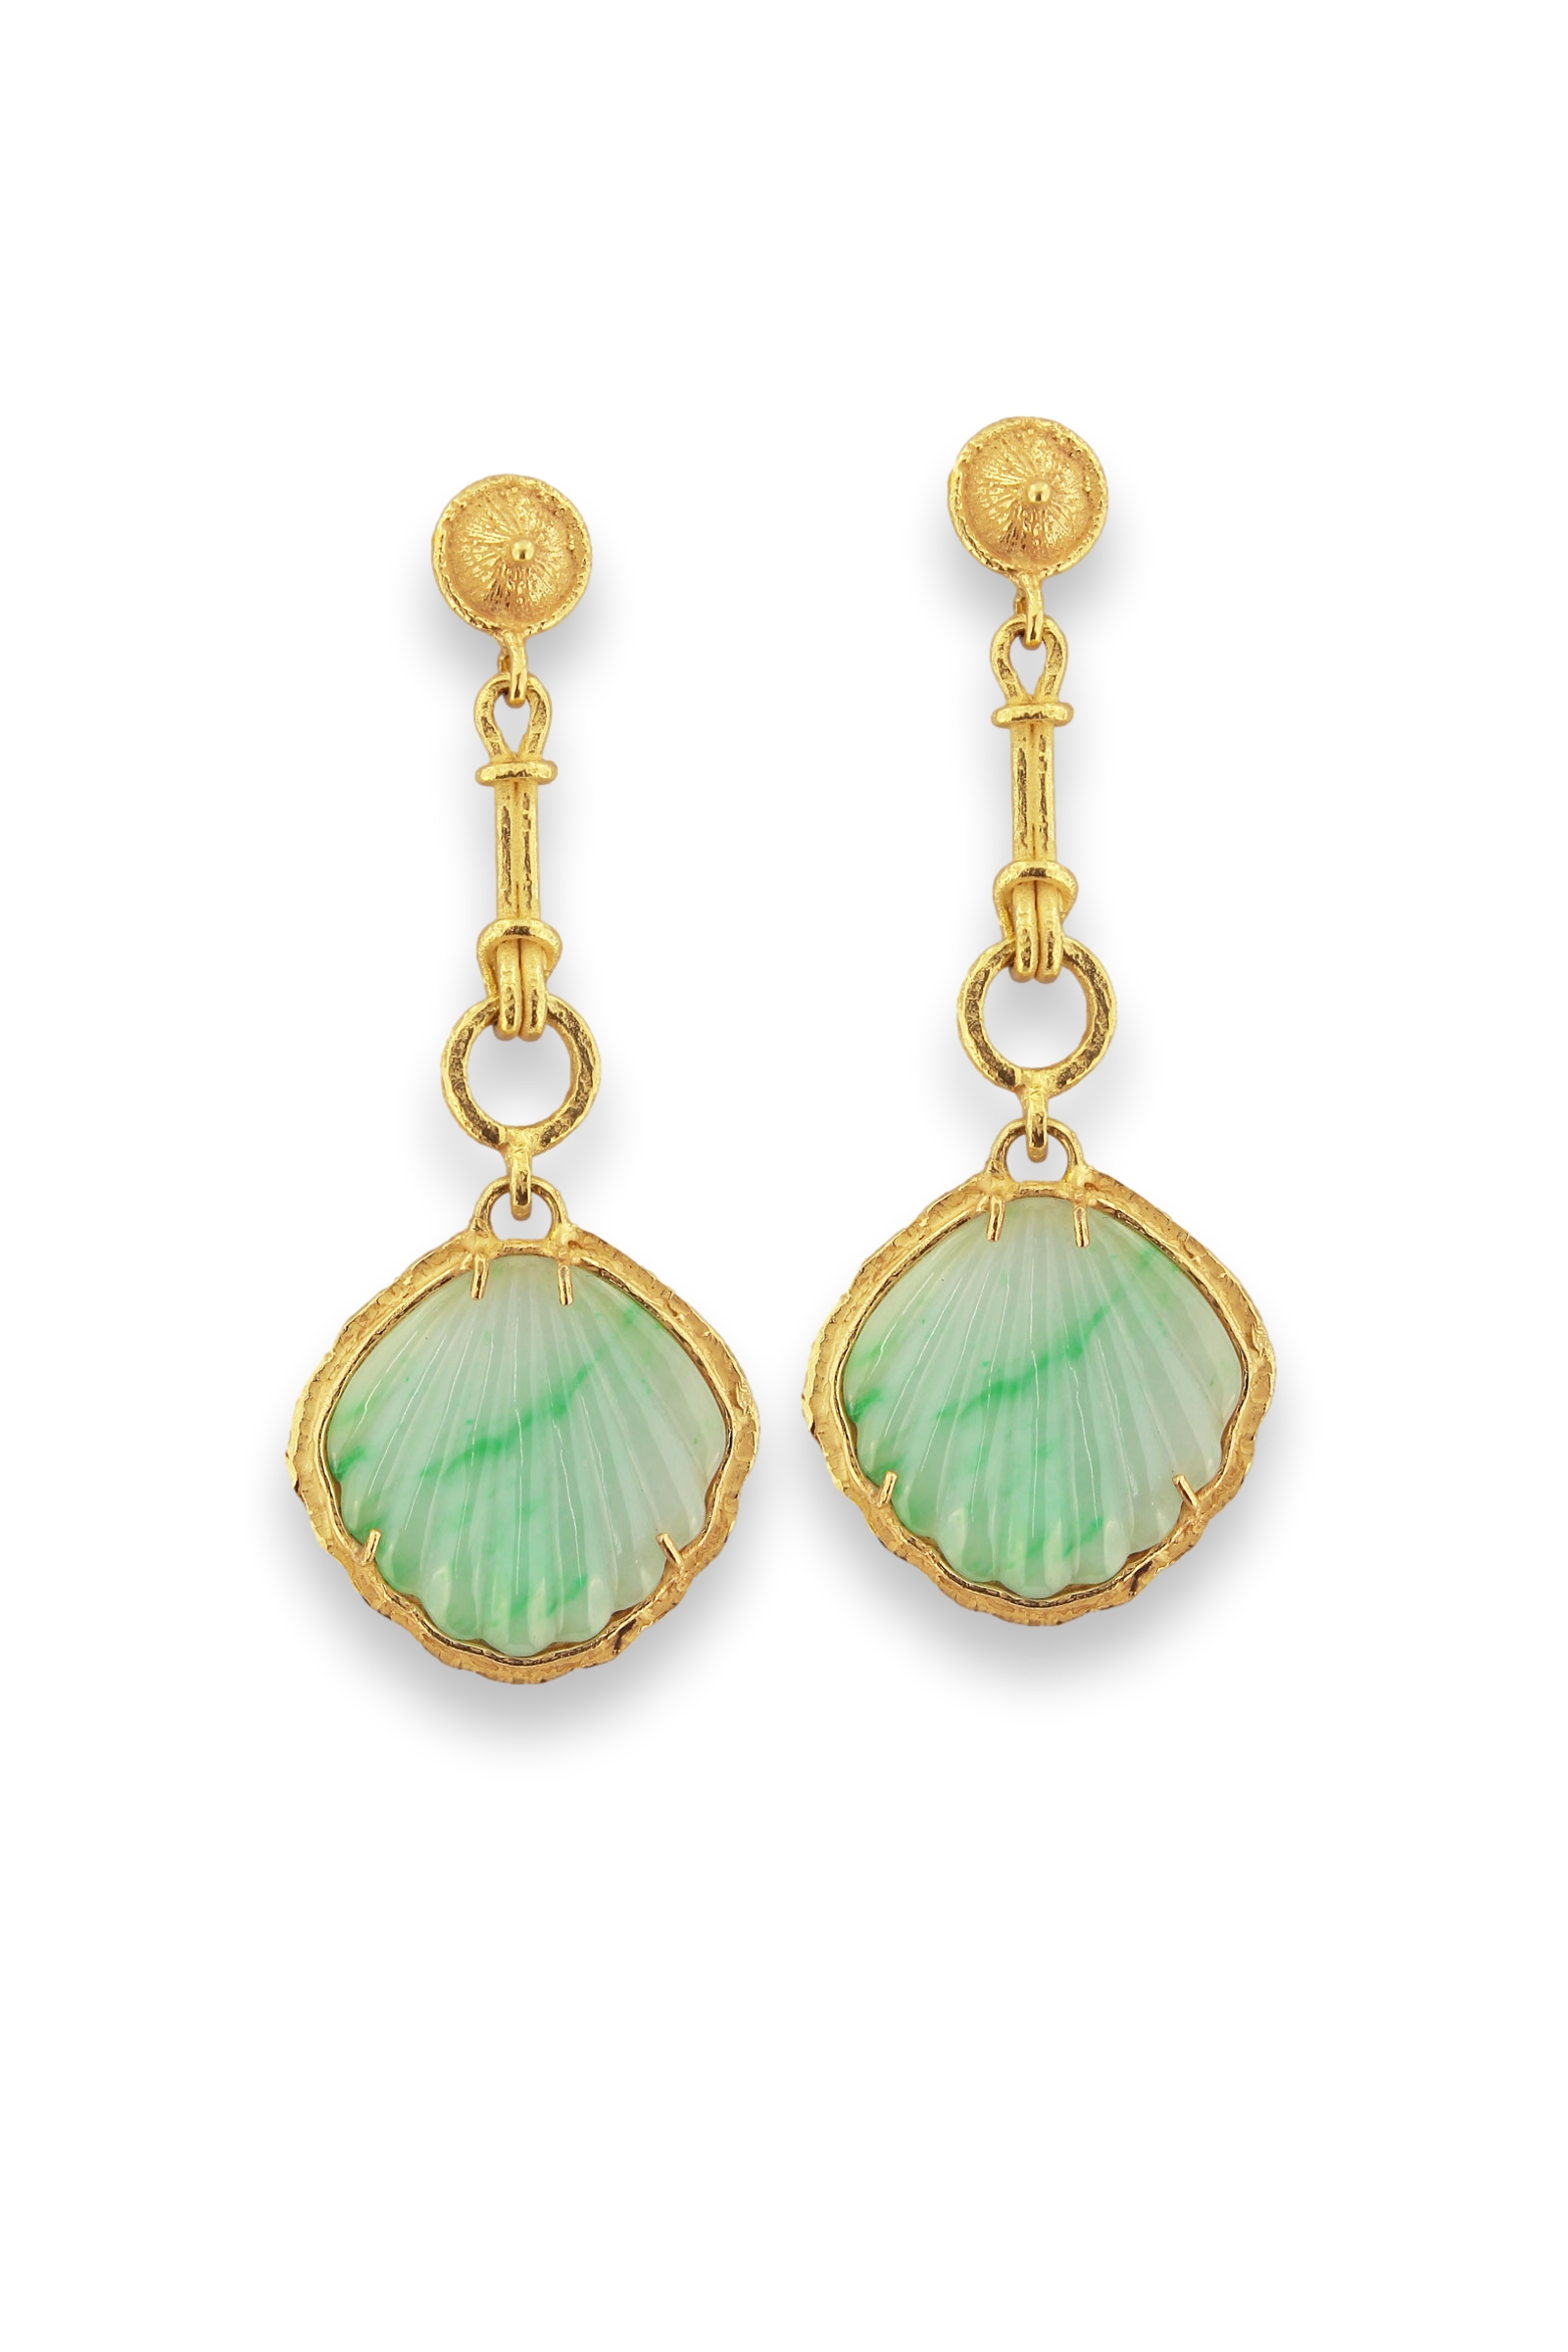 SD281B-18-Kt-Yellow-Gold-Pendant-Earrings-with-Light-Green-Jade-1_clipped_rev_1